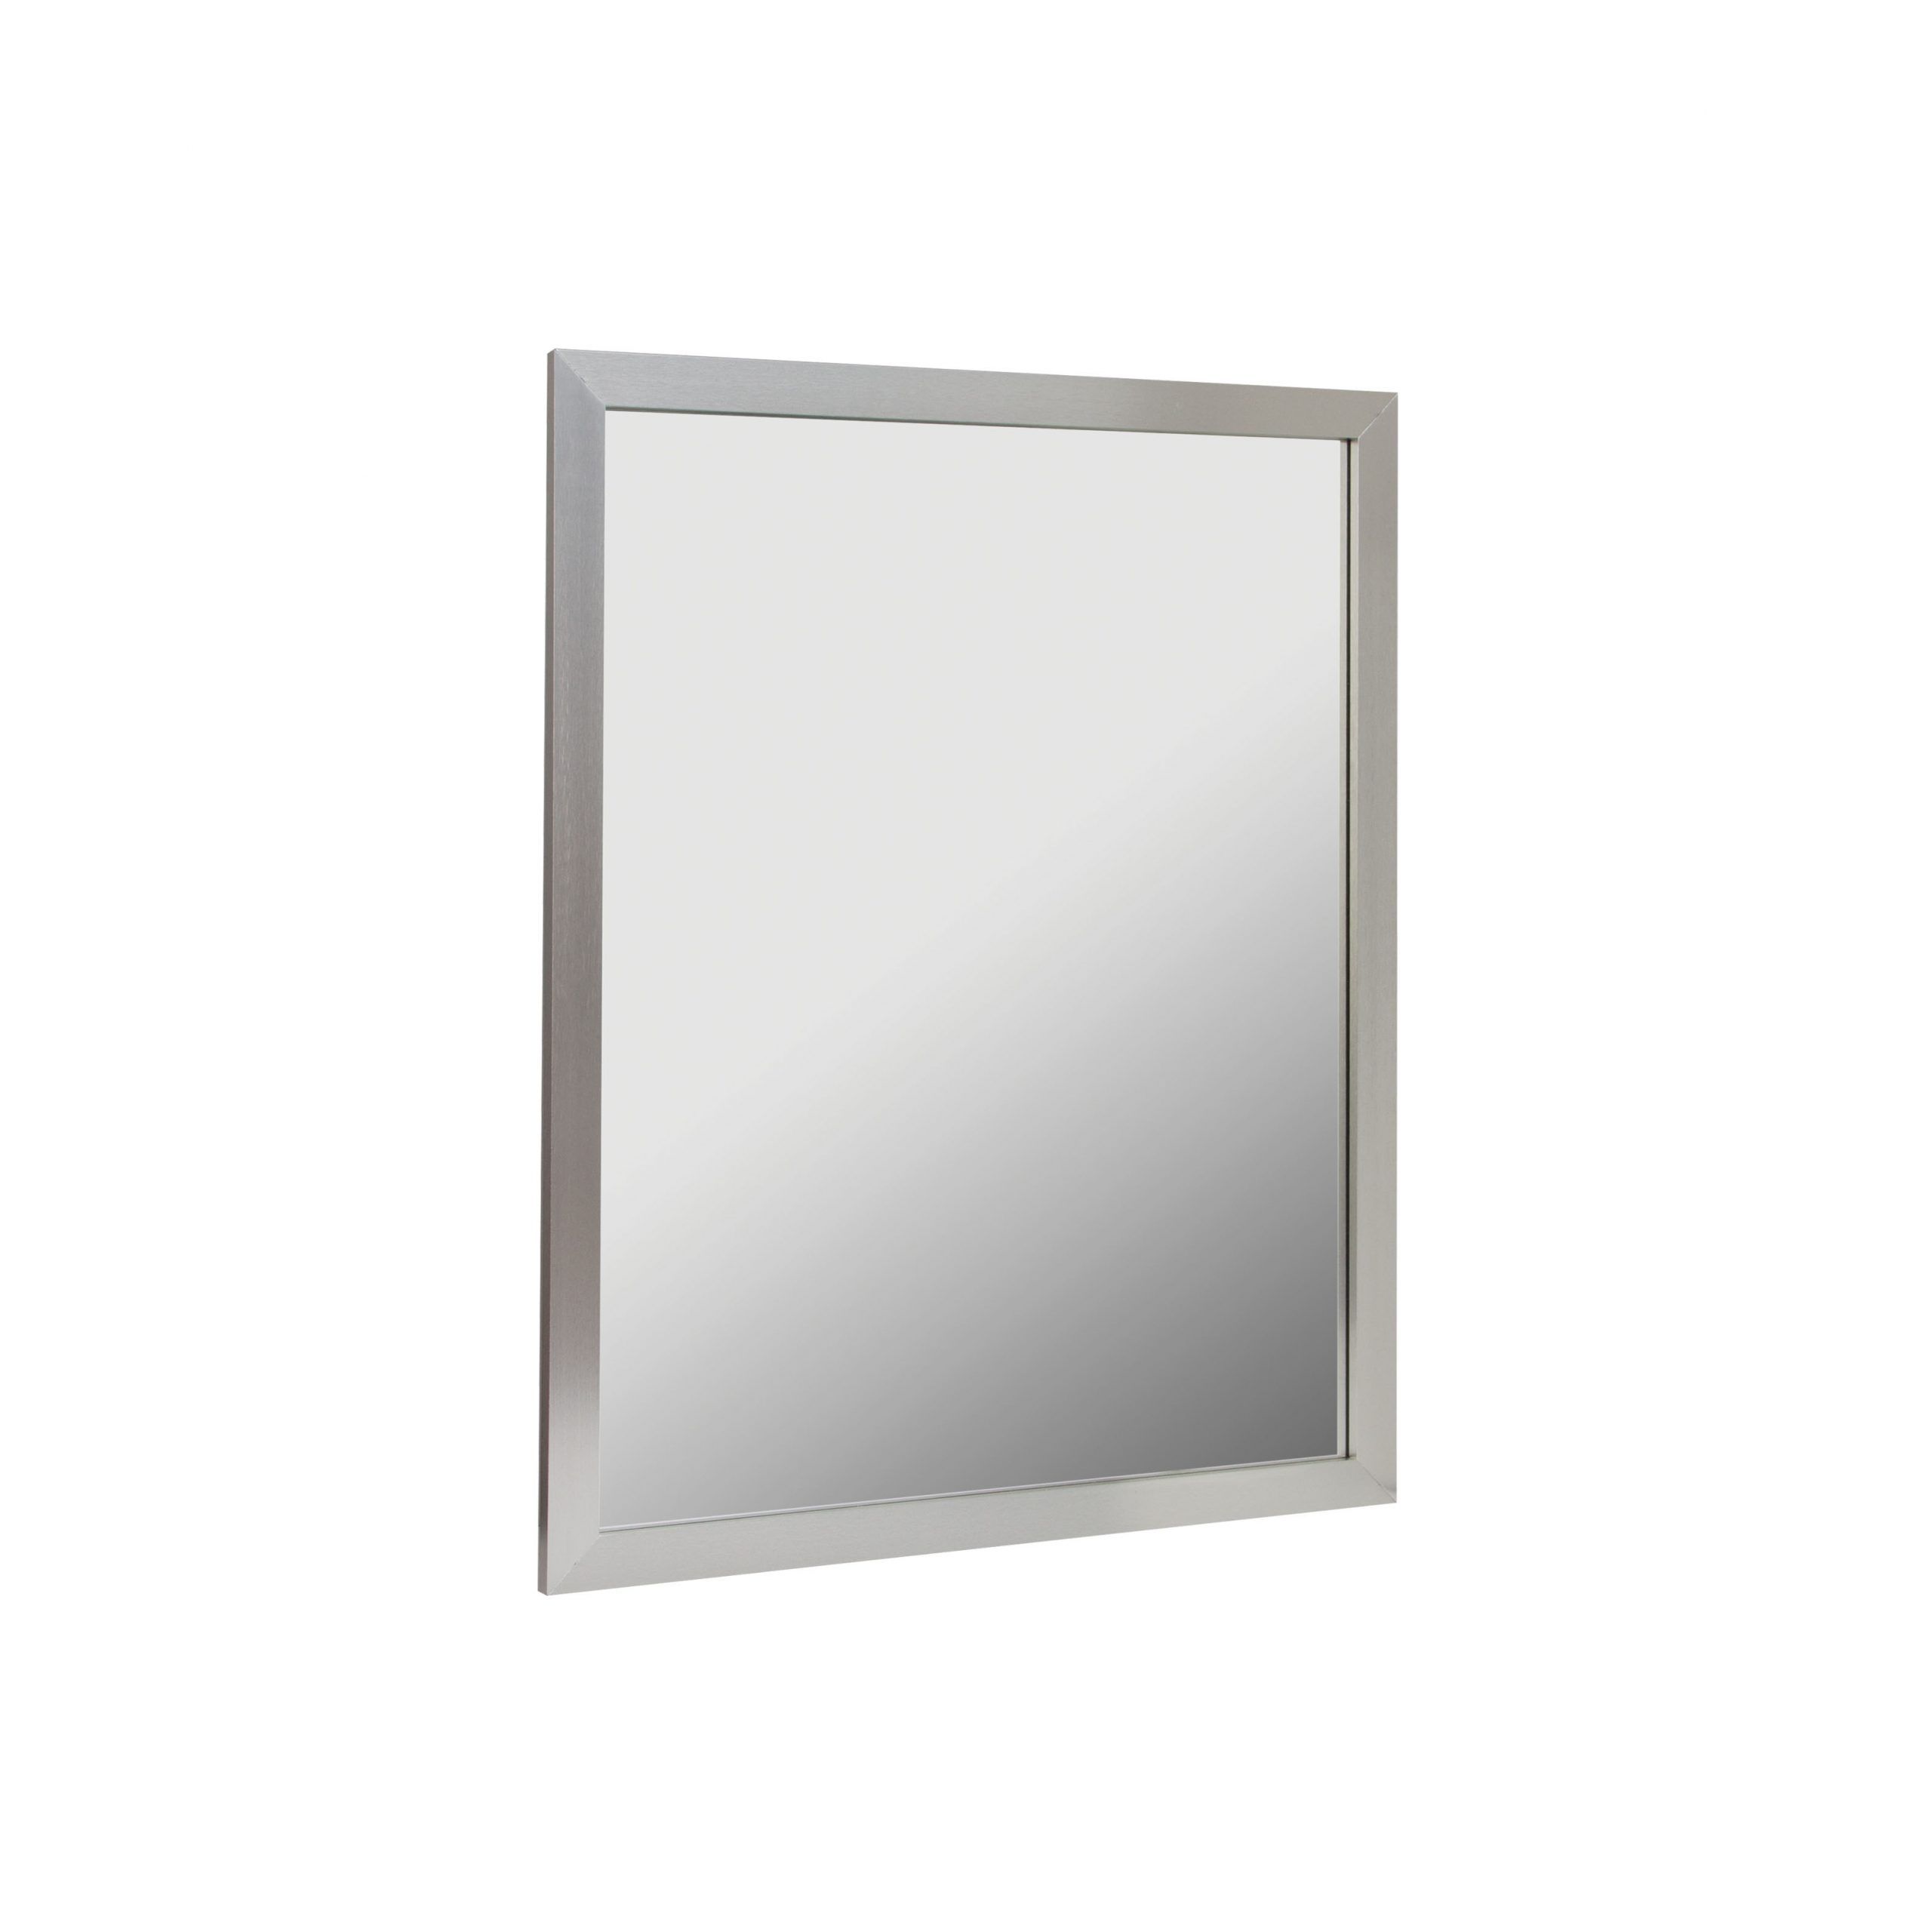 24x30 Aluminum Framed Mirror In Brushed Nickel – Foremost Bath In Oxidized Nickel Wall Mirrors (View 1 of 15)